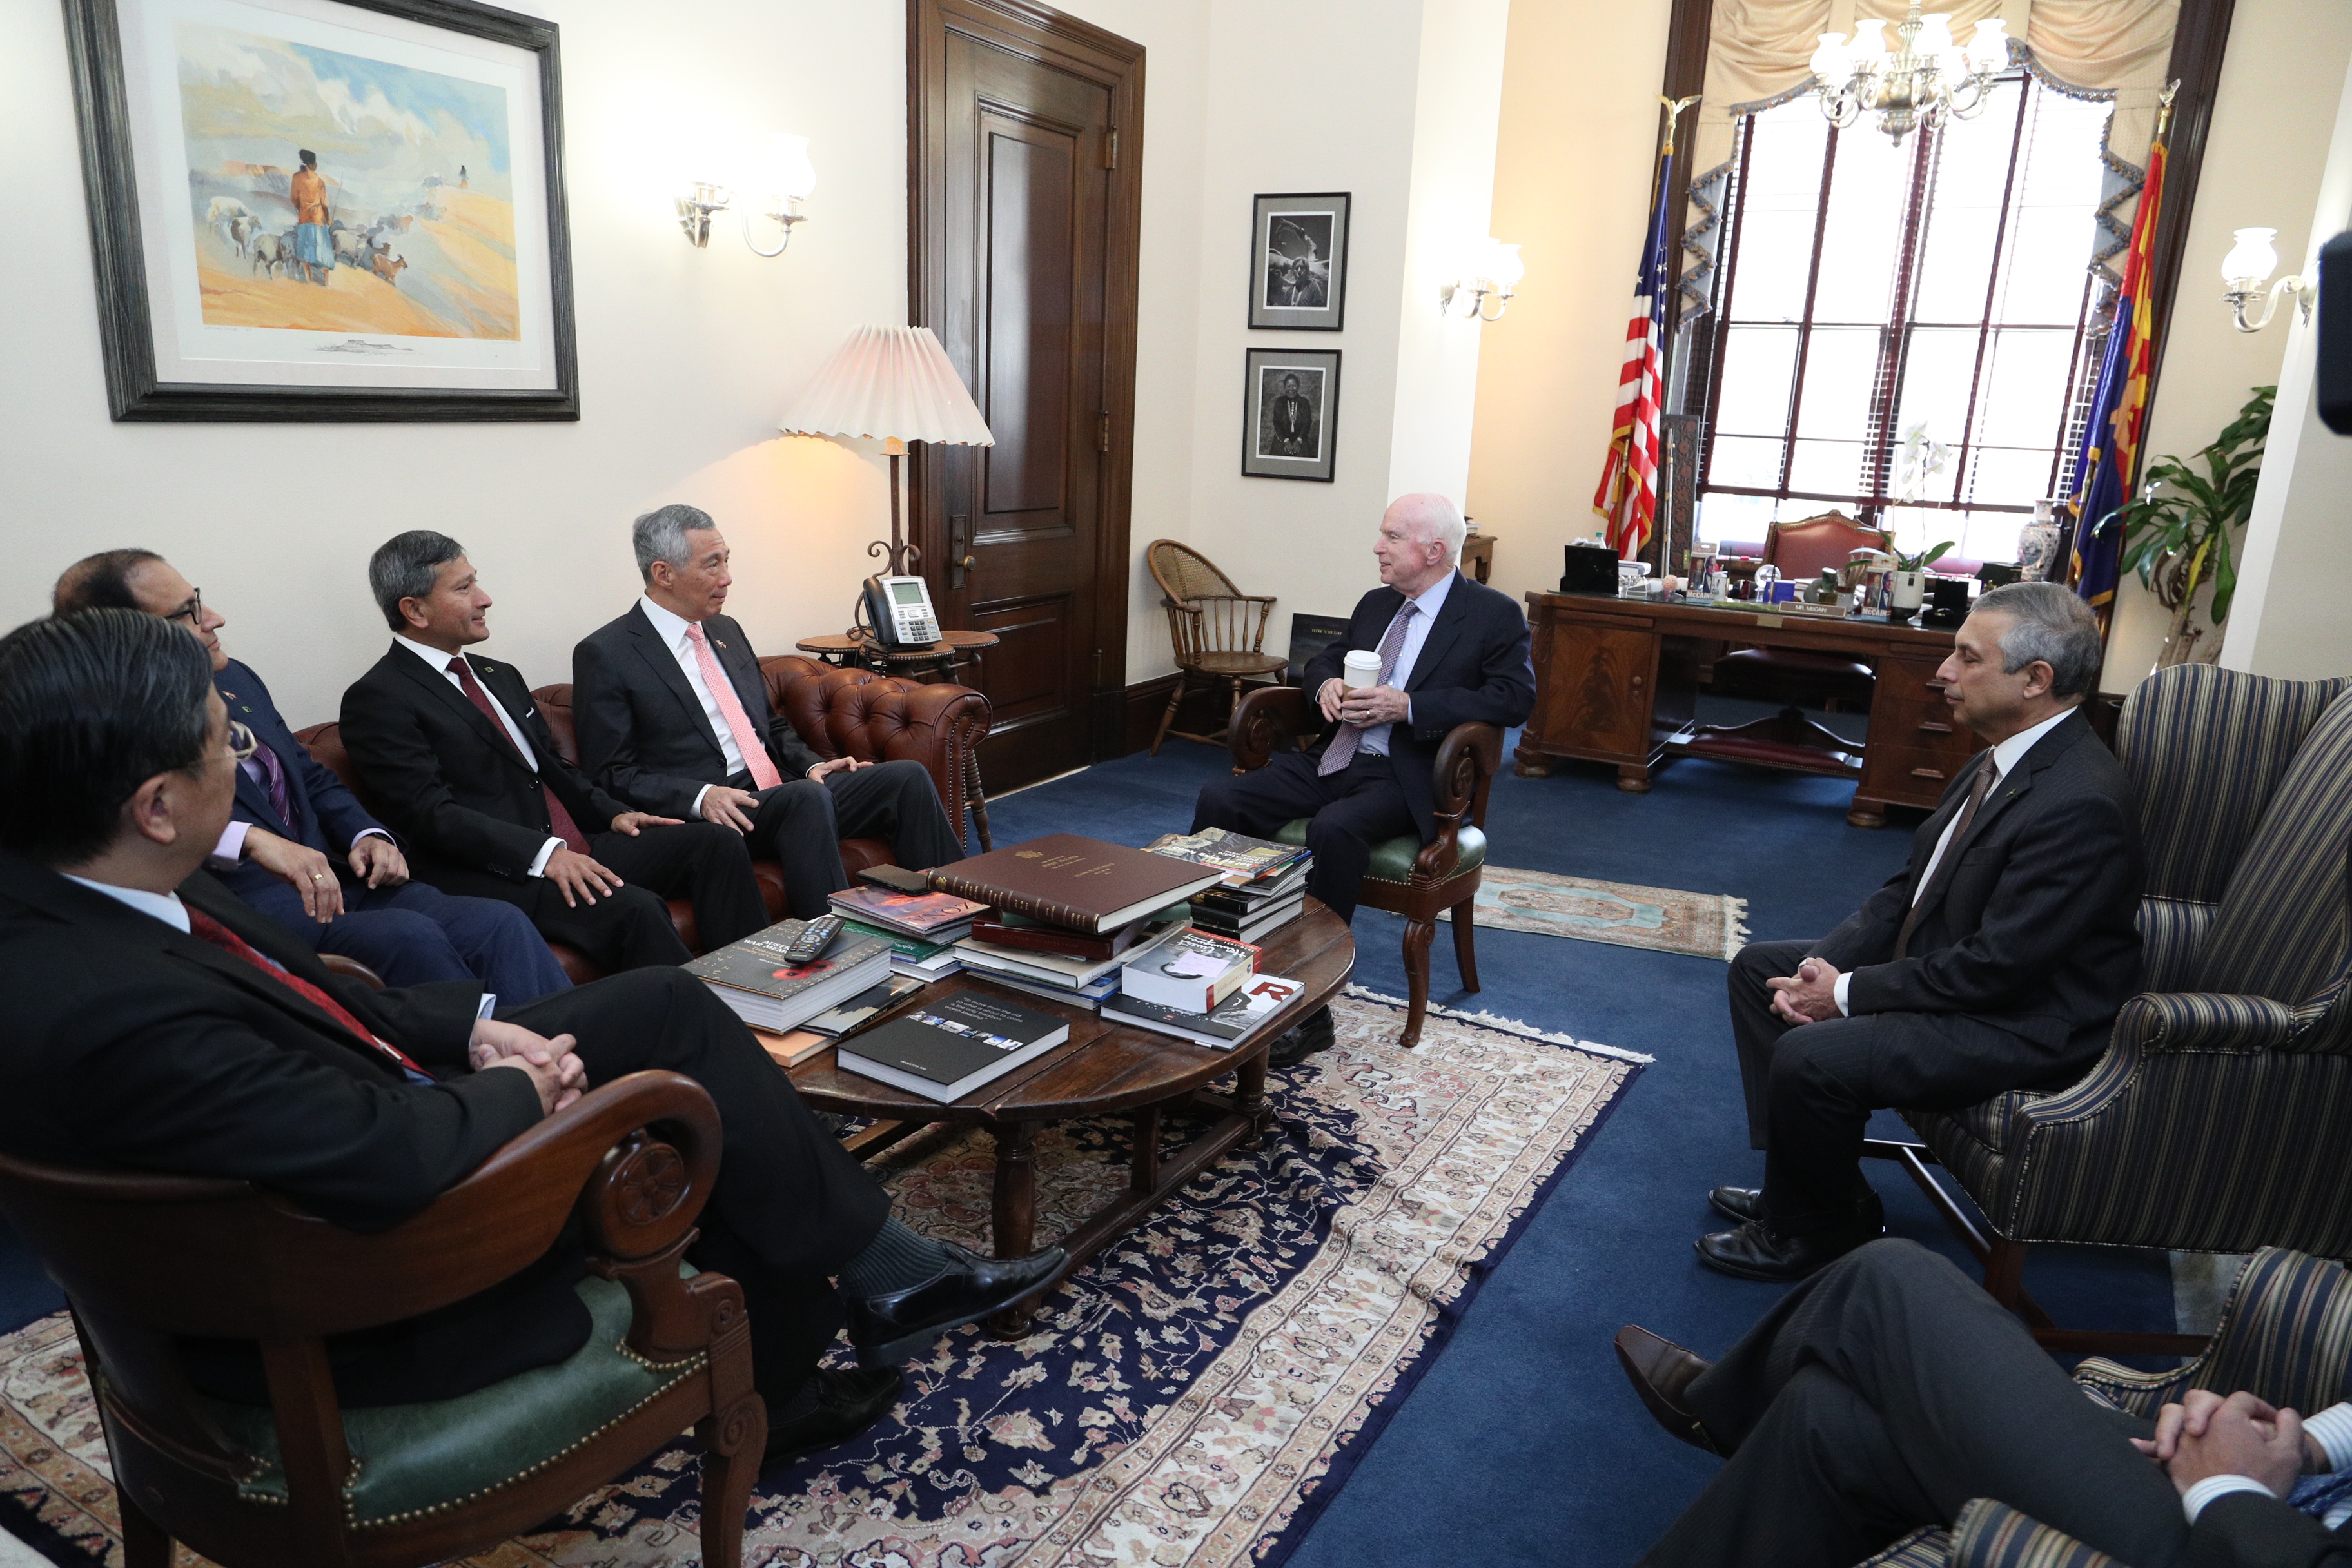 PM Lee Hsien Loong meeting with Senate Armed Services Committee Chairman John McCain on 25 Oct 2017 (MCI Photo by Kenji Soon)